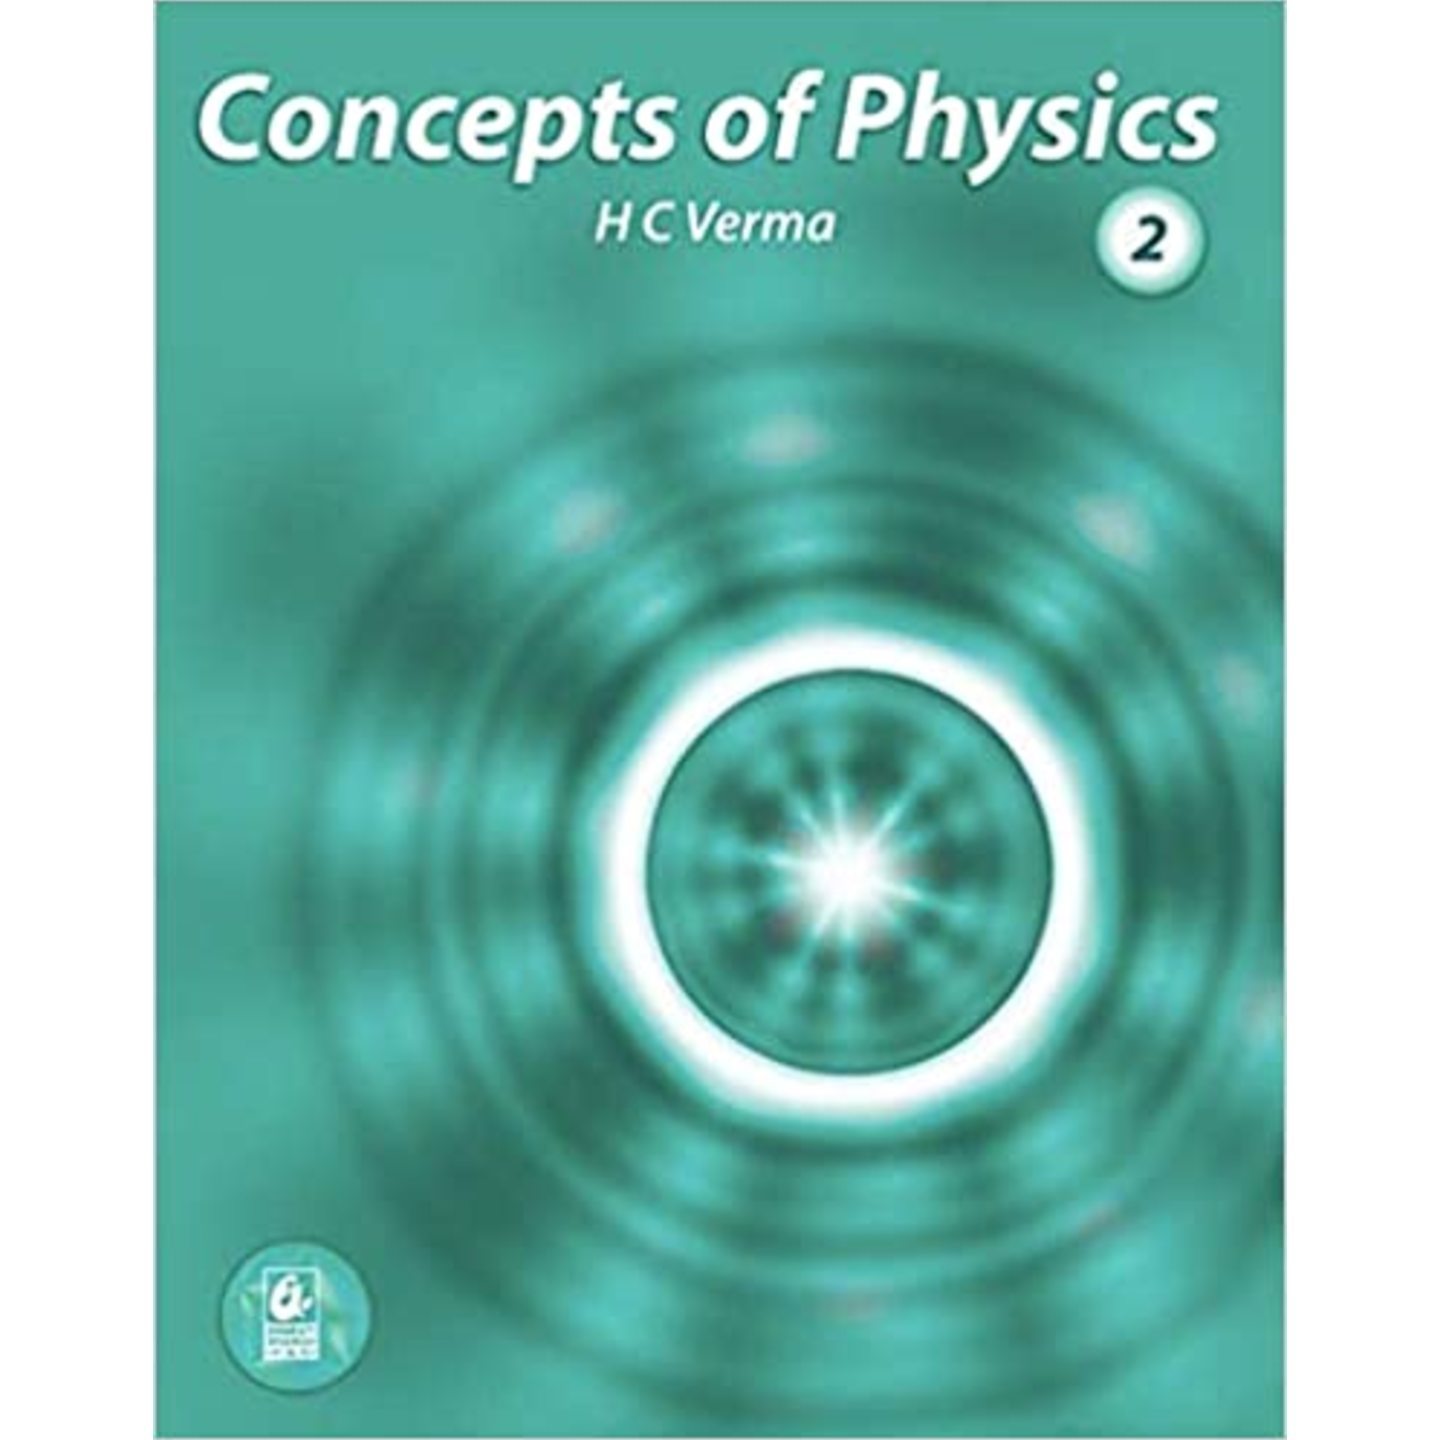 Concept of Physics Part-2 by H.C Verma